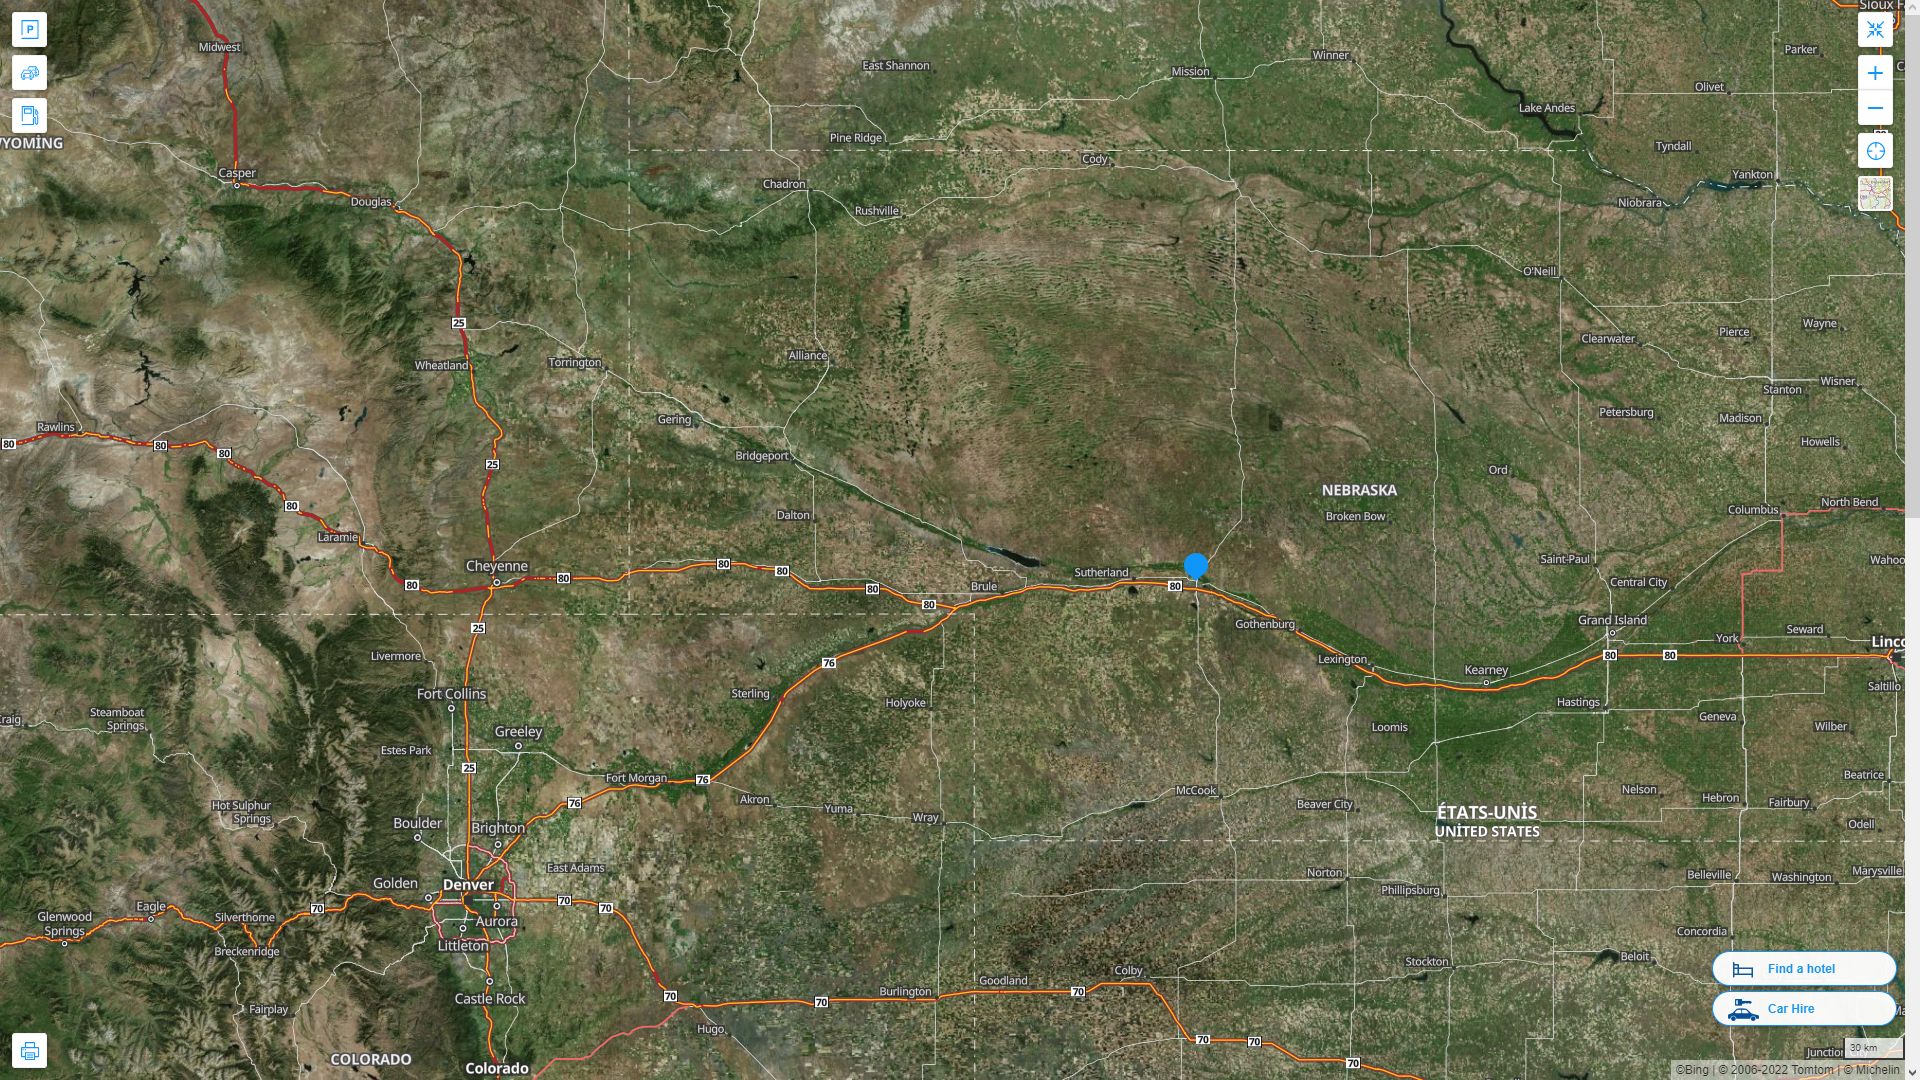 North Platte Nebraska Highway and Road Map with Satellite View